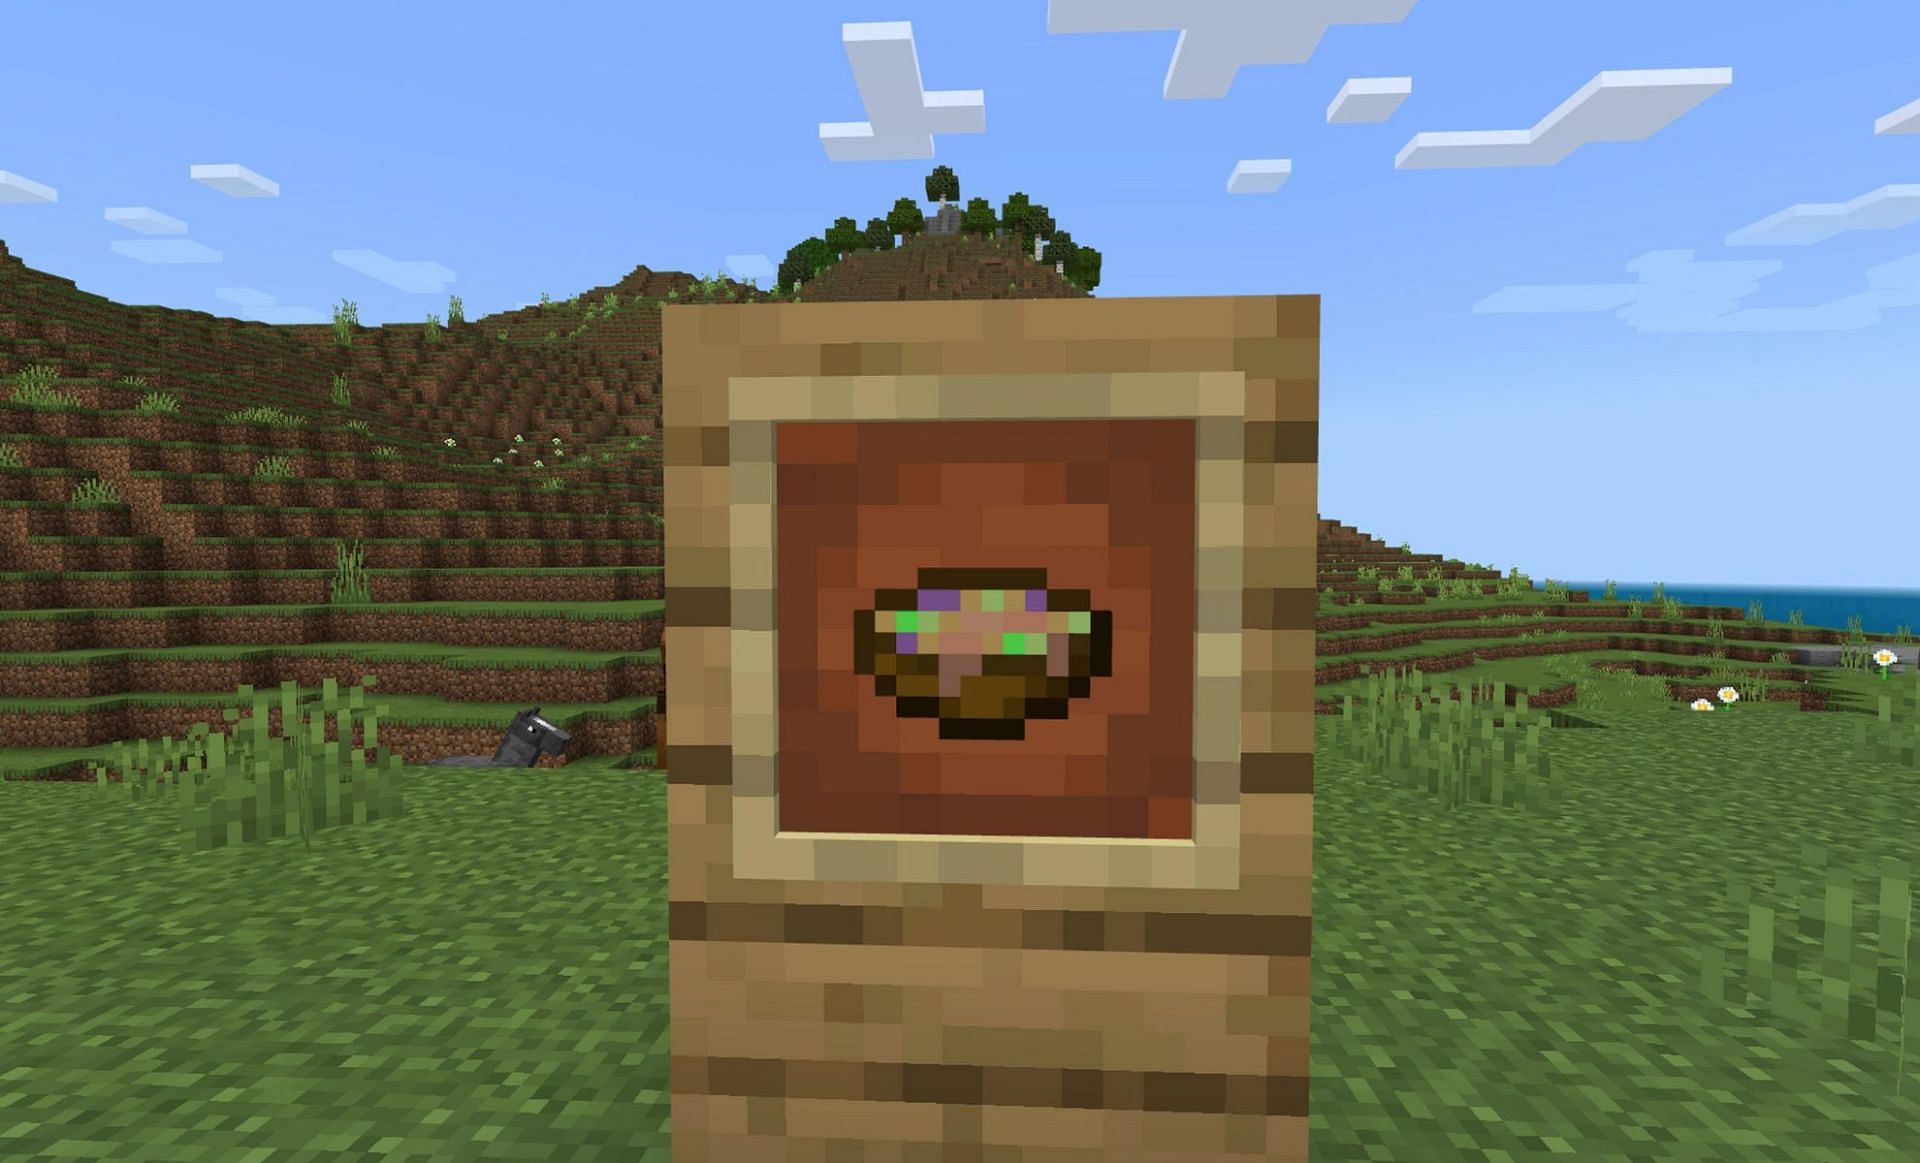 Want to cook Suspicious Stew? Now you can! (Image via Mojang)